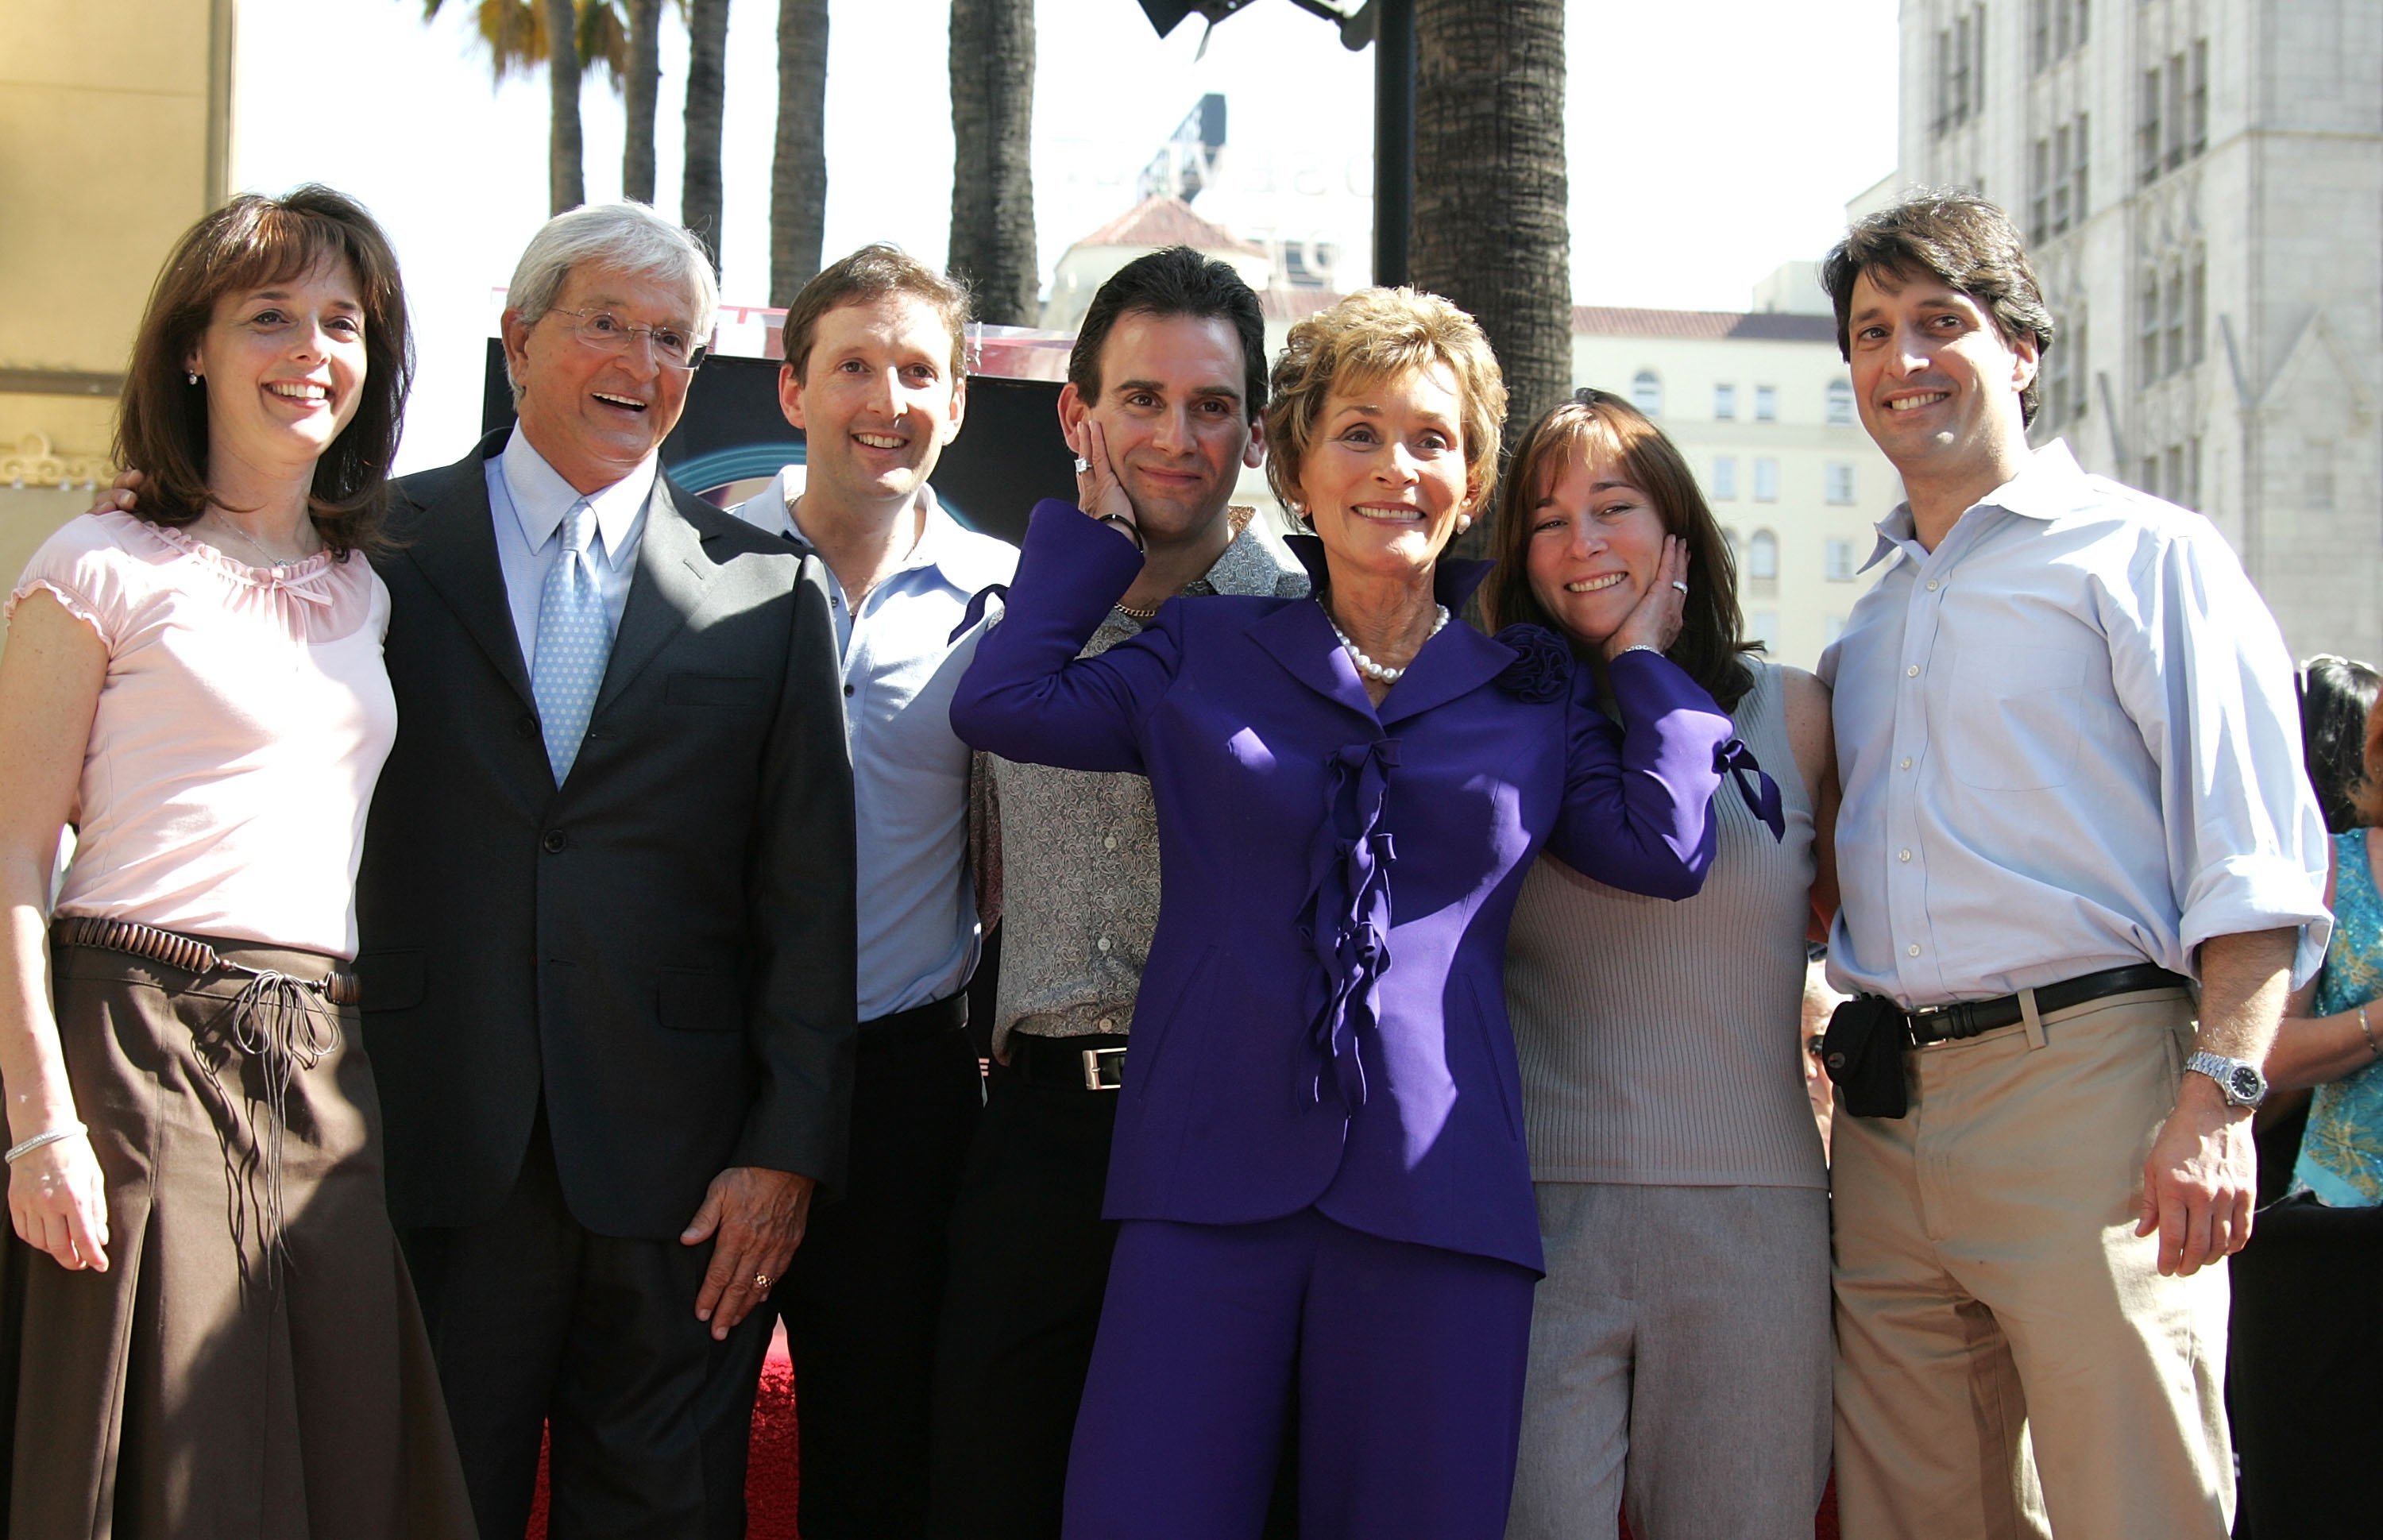 Judge Judy Sheindlin poses with her family as she receives the 2304 star on the Hollywood Walk of Fame, on February 14, 2006 in Hollywood, California | Source: Getty Images